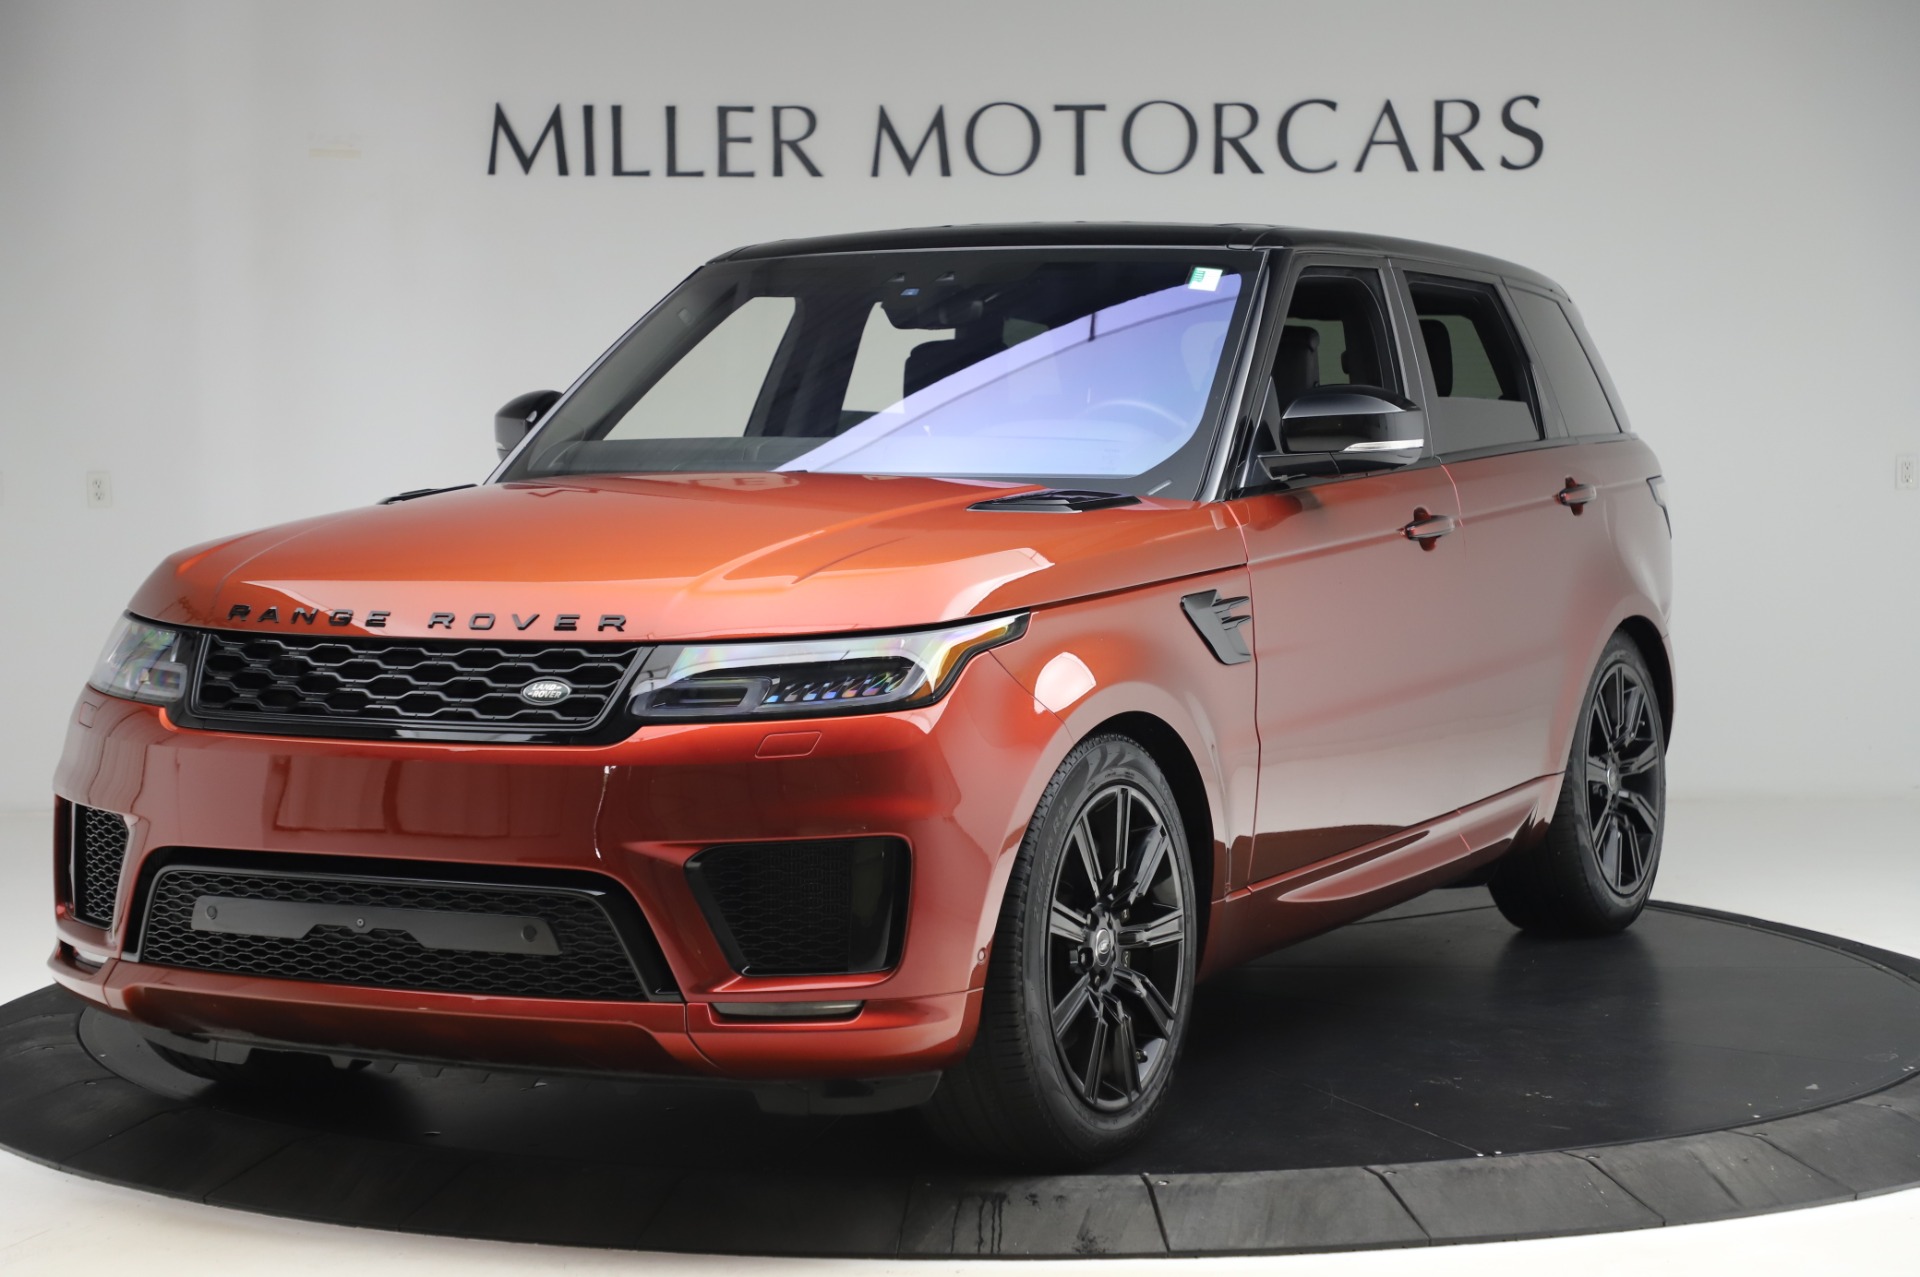 Used 2019 Land Rover Range Rover Sport Autobiography for sale Sold at Bugatti of Greenwich in Greenwich CT 06830 1